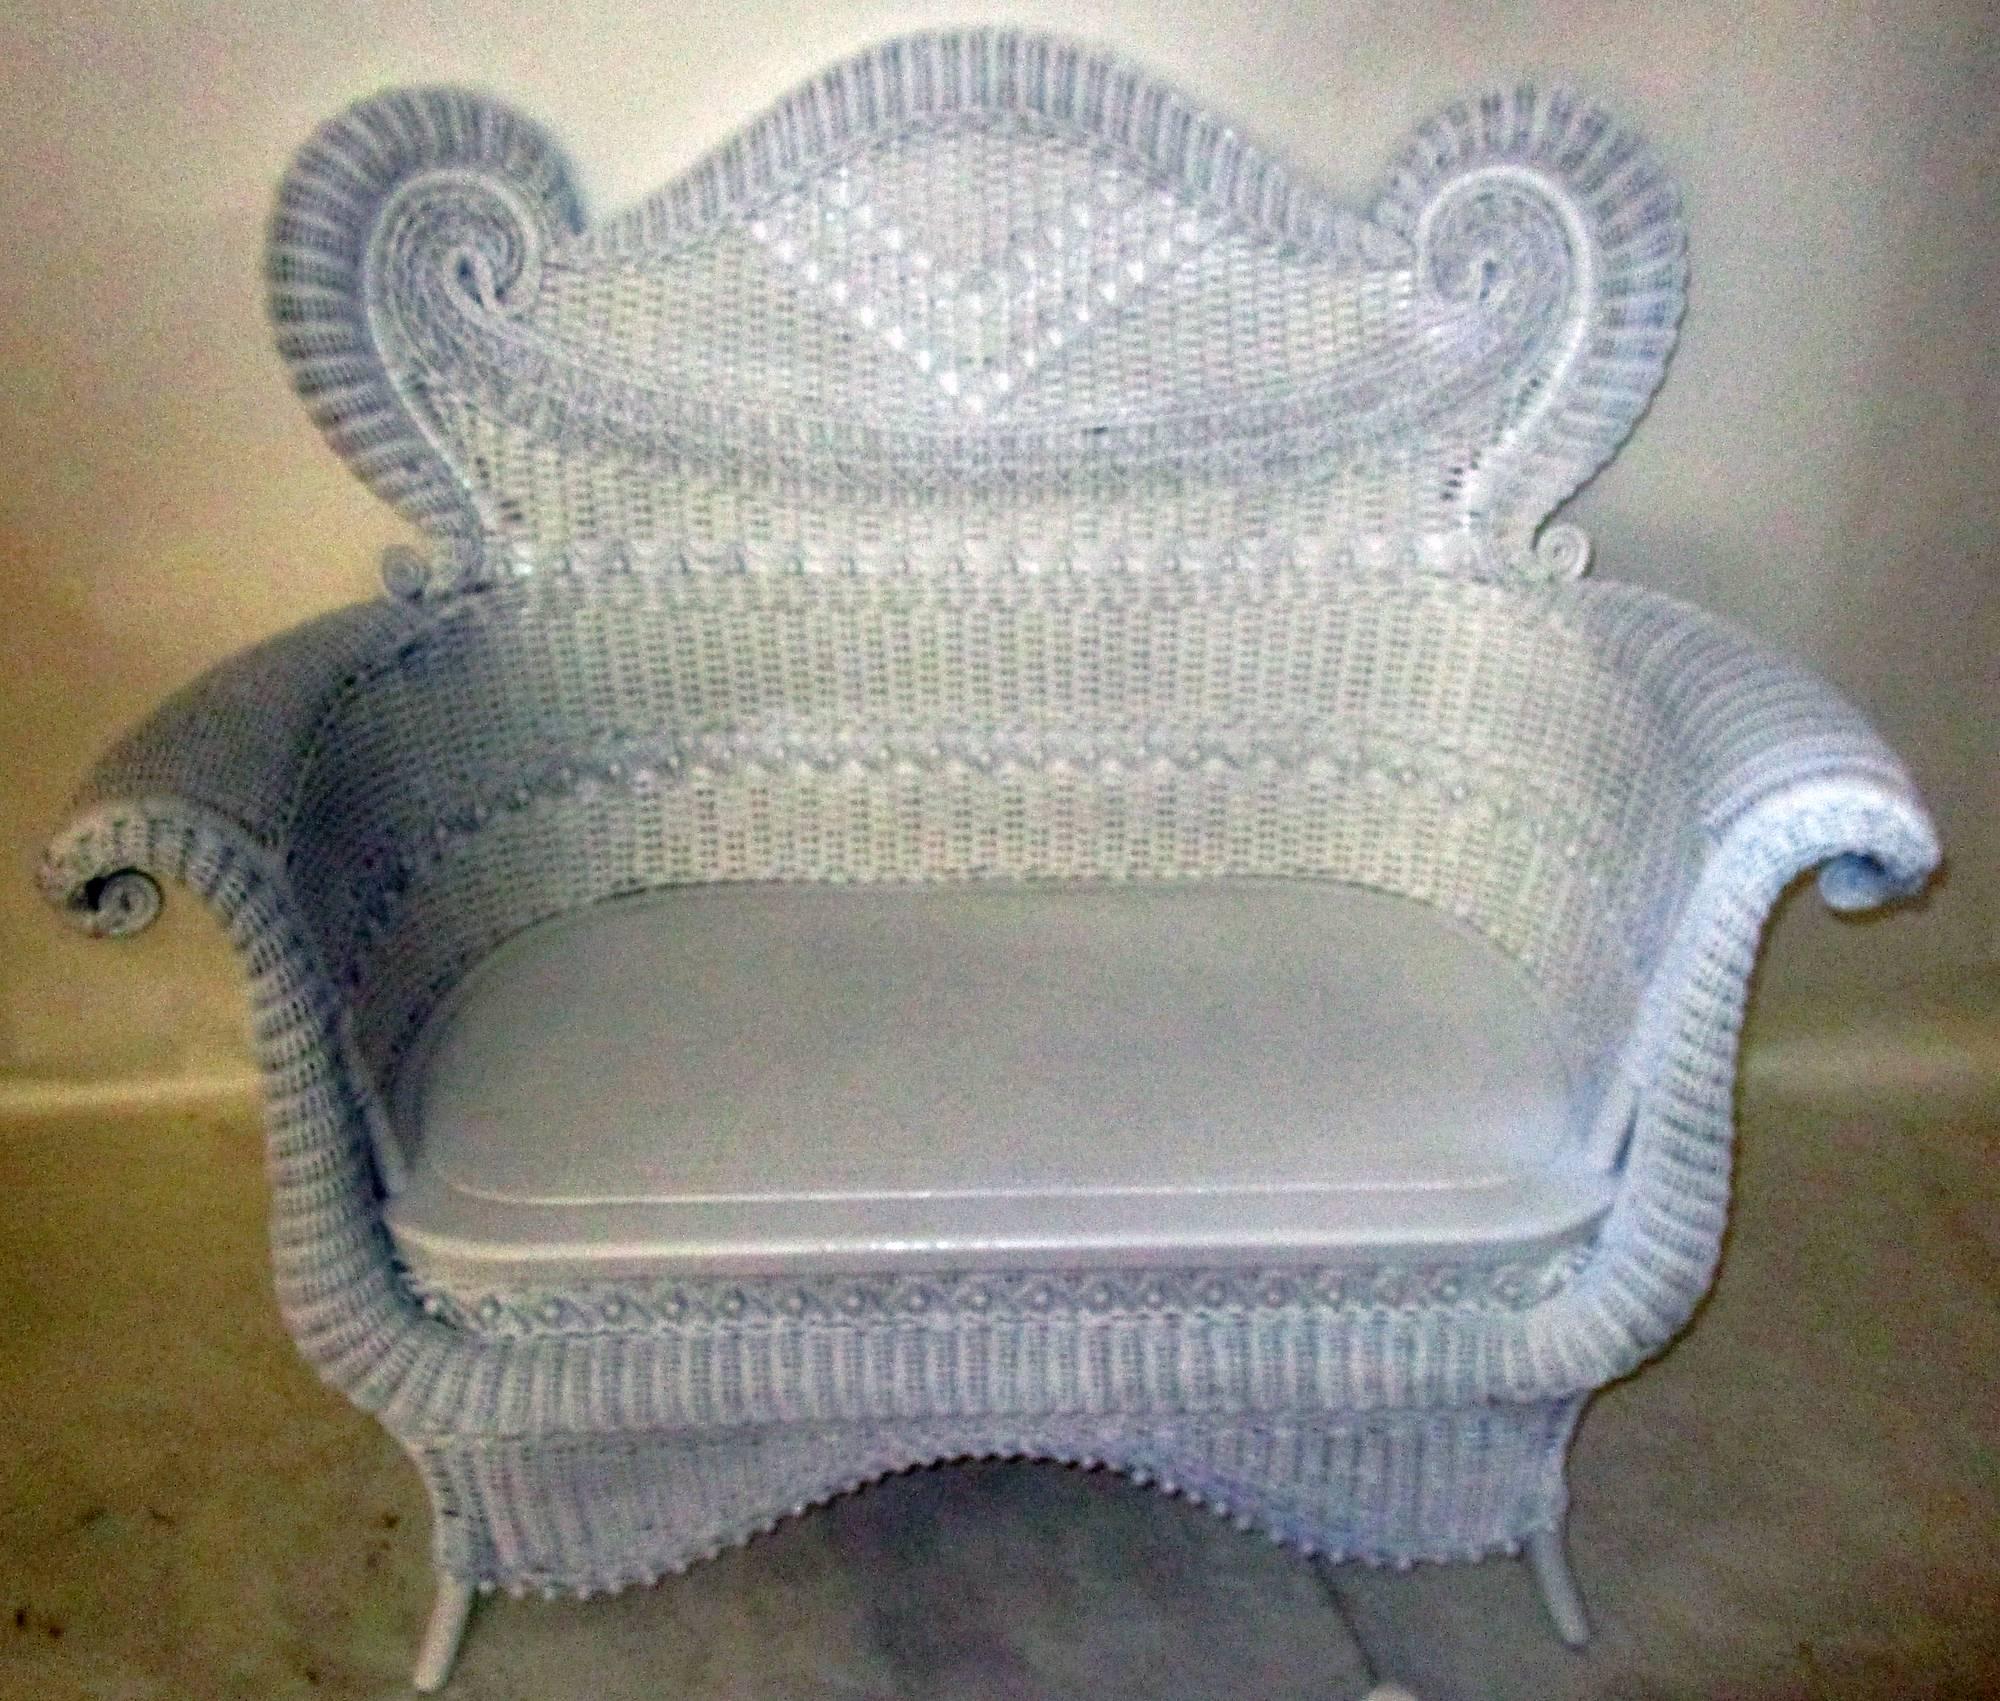 This painted wicker fanciful Victorian settee features all the bells and whistles the Heywood Bros. and Wakefield Co. was known for; curves, rolls, curlicues, scrolls, fish scales and tiny wooden beads. On a very sturdy hard wood (ash) frame with a